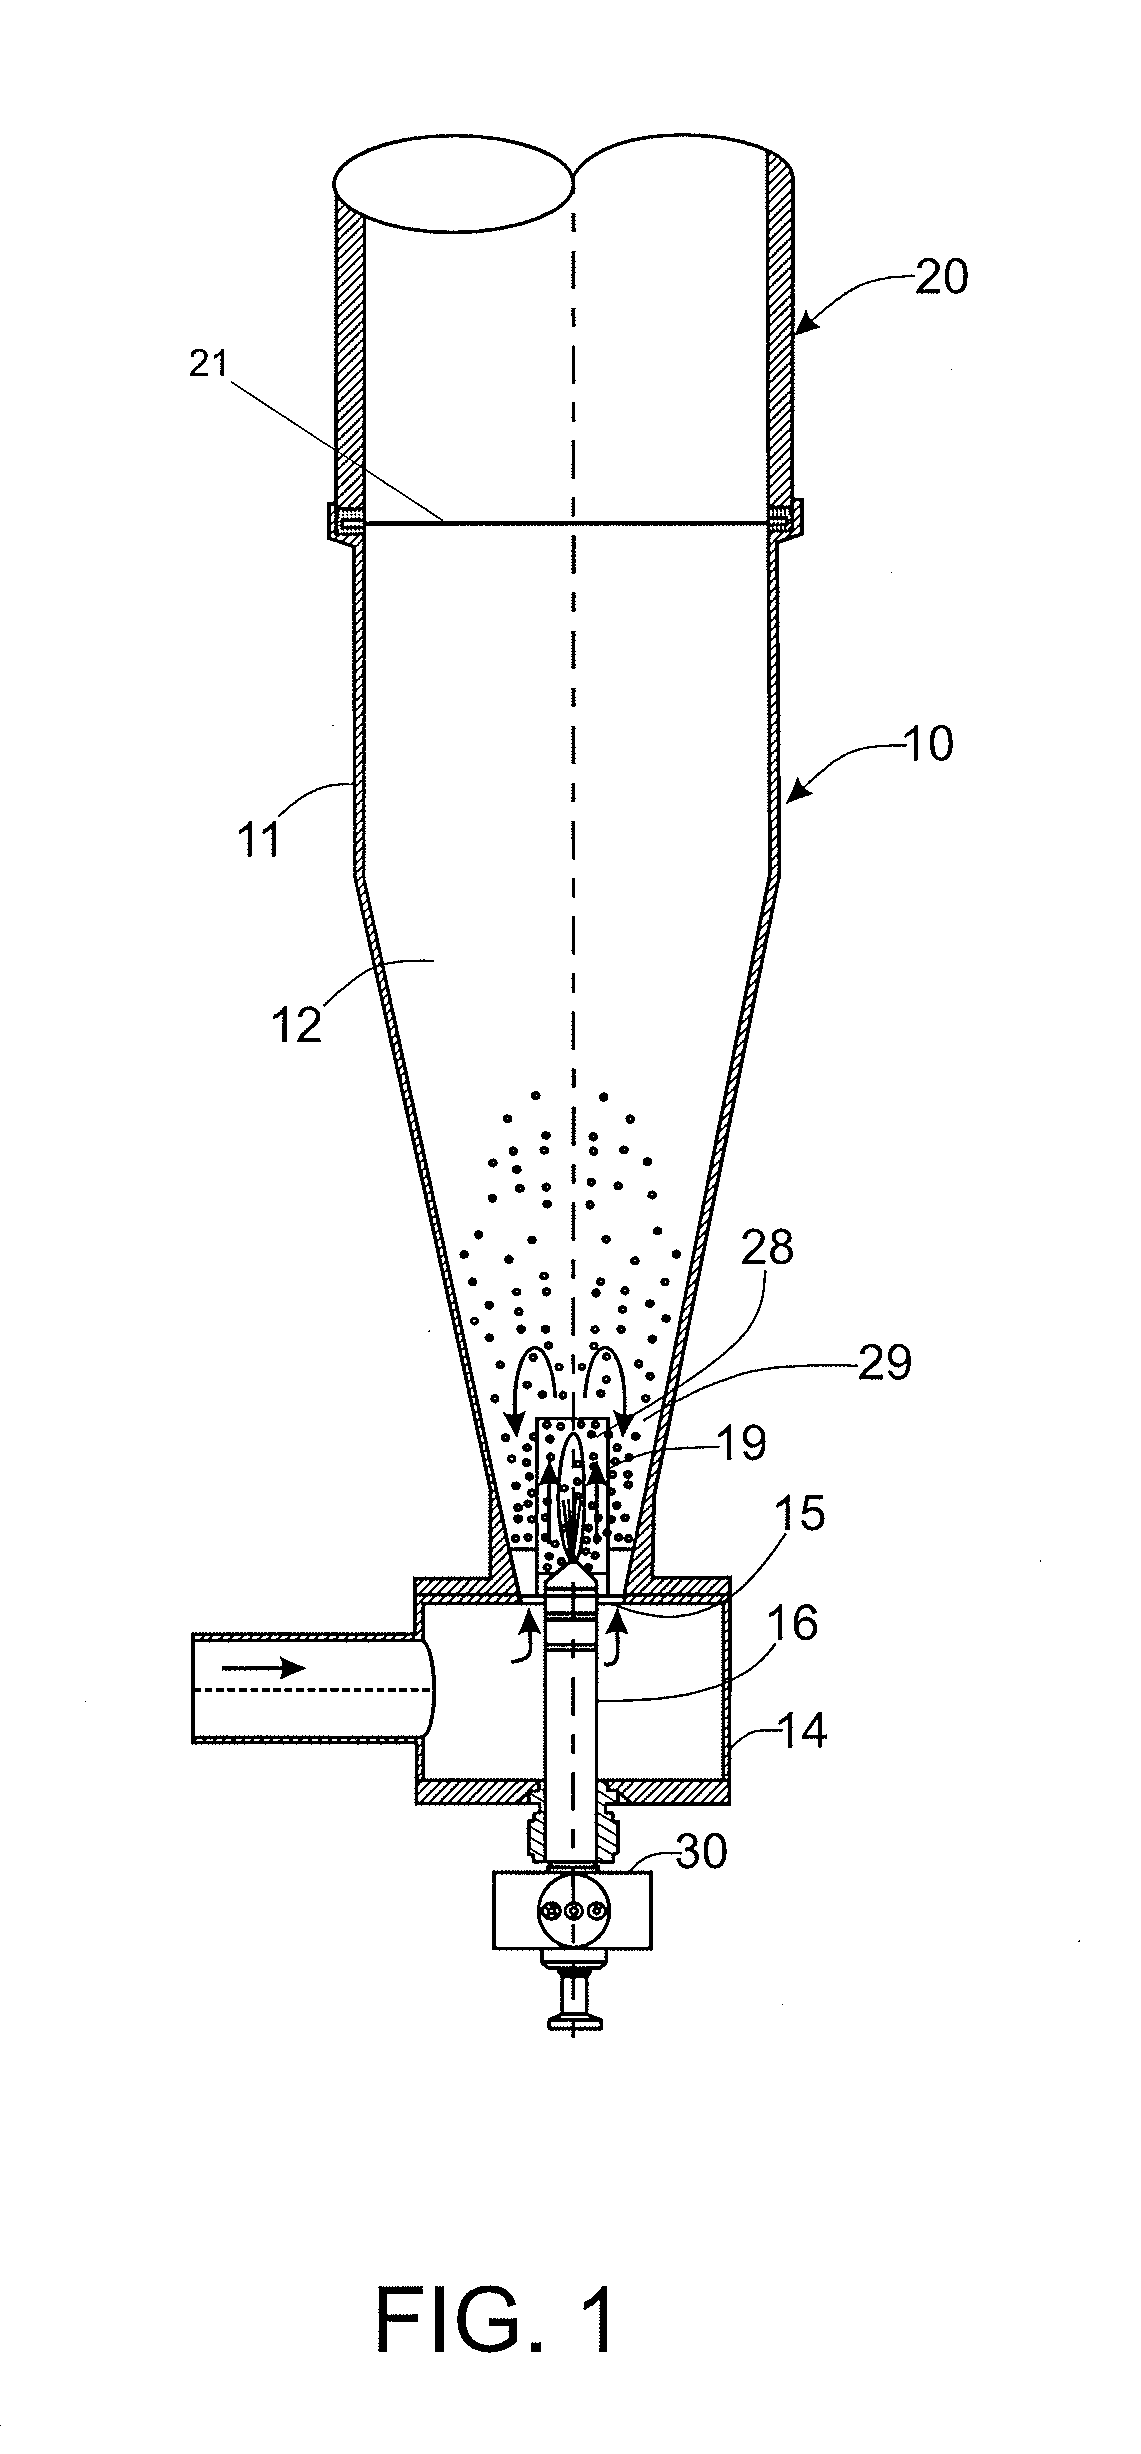 Fluidized bed coating apparatus